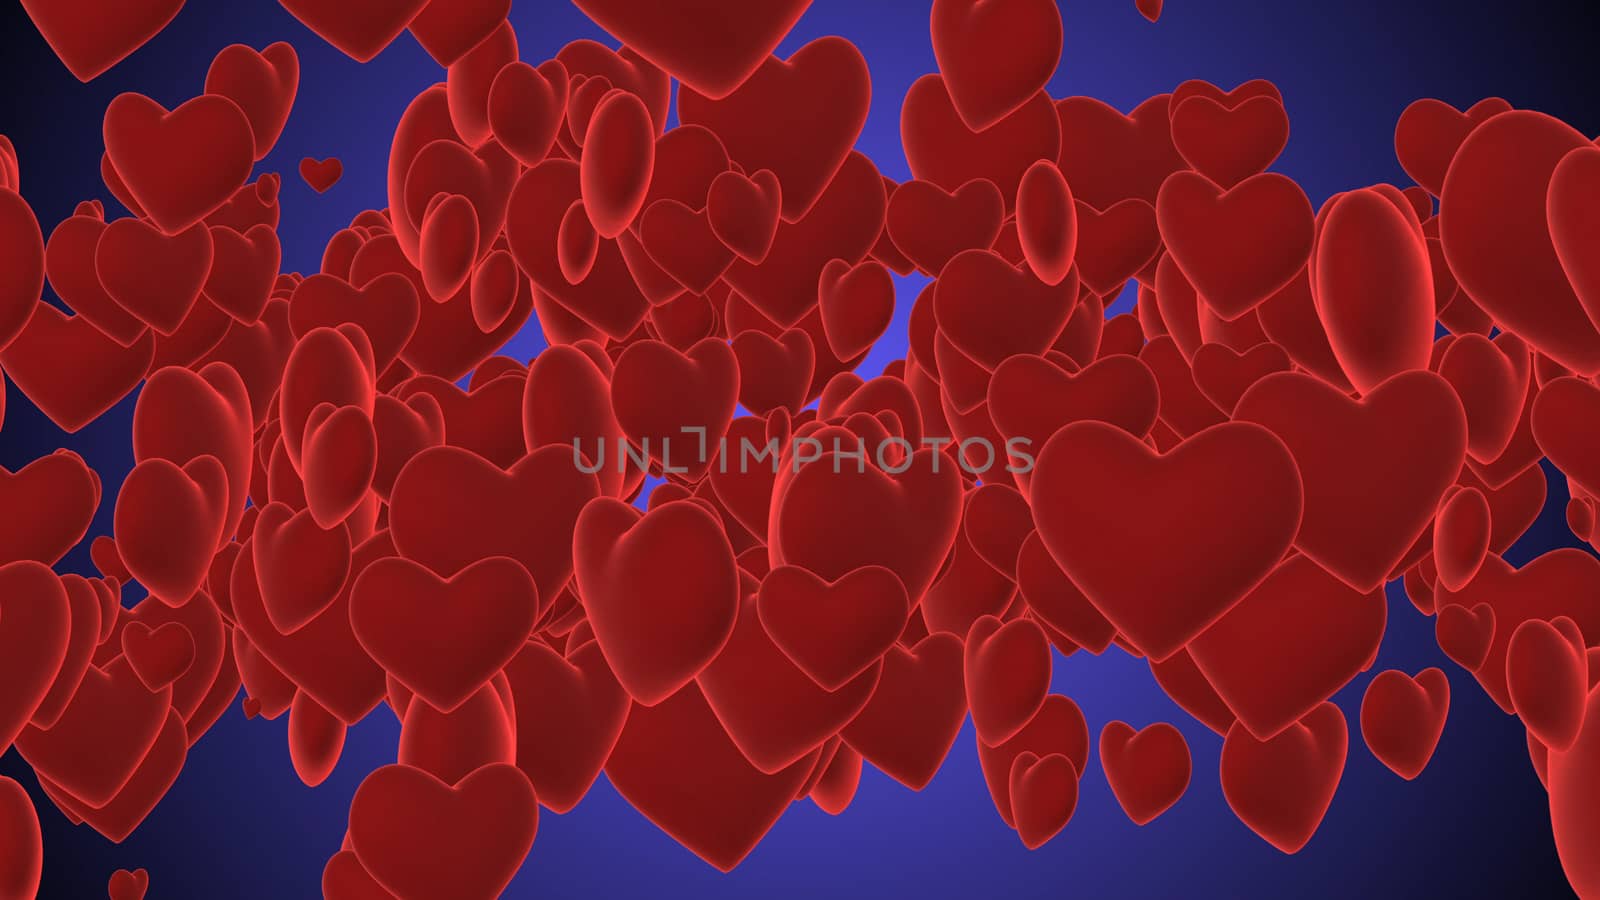 A romantic 3d rendering of purple hearts flying and shining together in the violet background. They strike a chord relating to St. Valentine day. They create a lovely atmosphere.